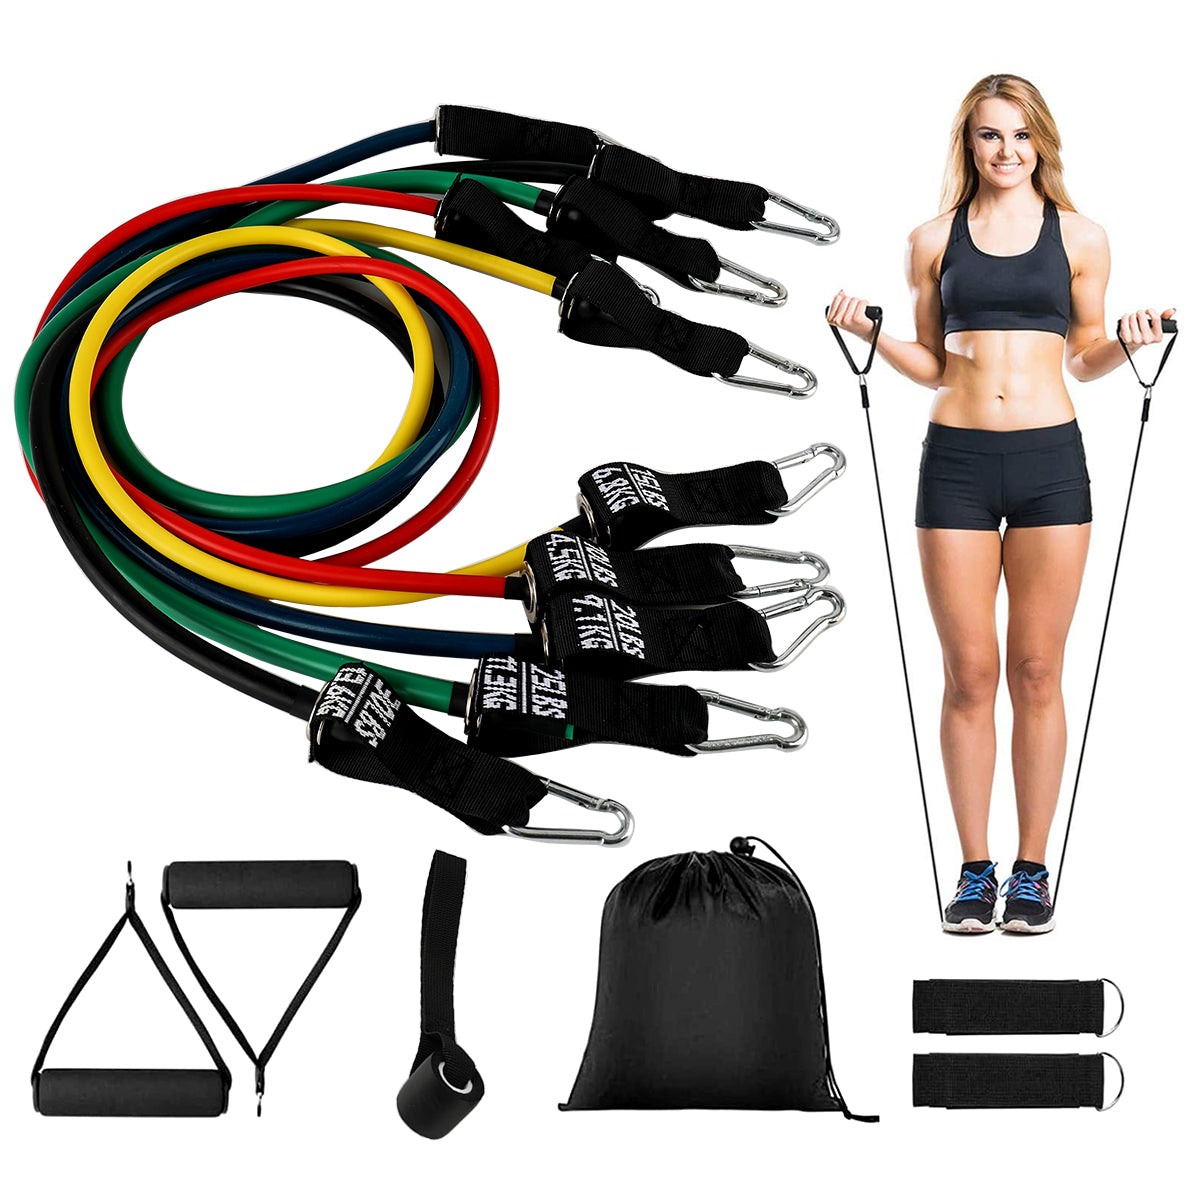 1/2/3/4/5pcs Yoga Stretching Strap Equipment For Women, Shoulder & Back  Stretching, Resistance Band For Strength Training For Men